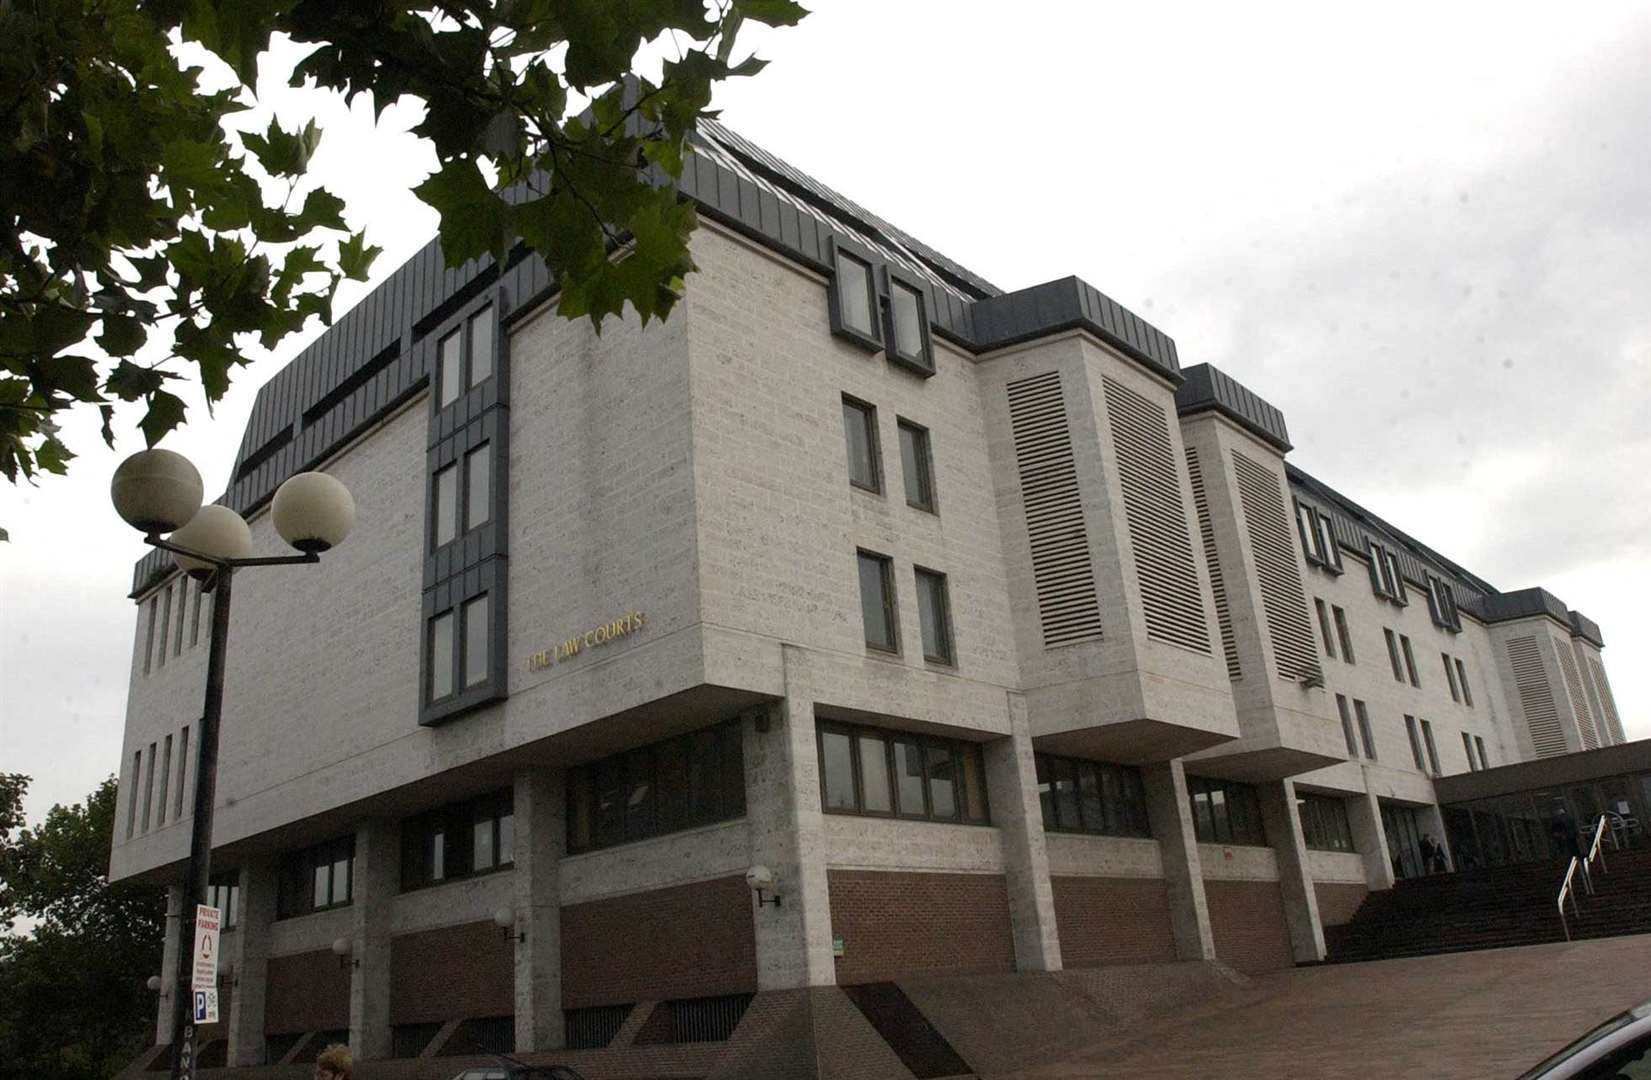 Southgate was sentenced at Maidstone Crown Court